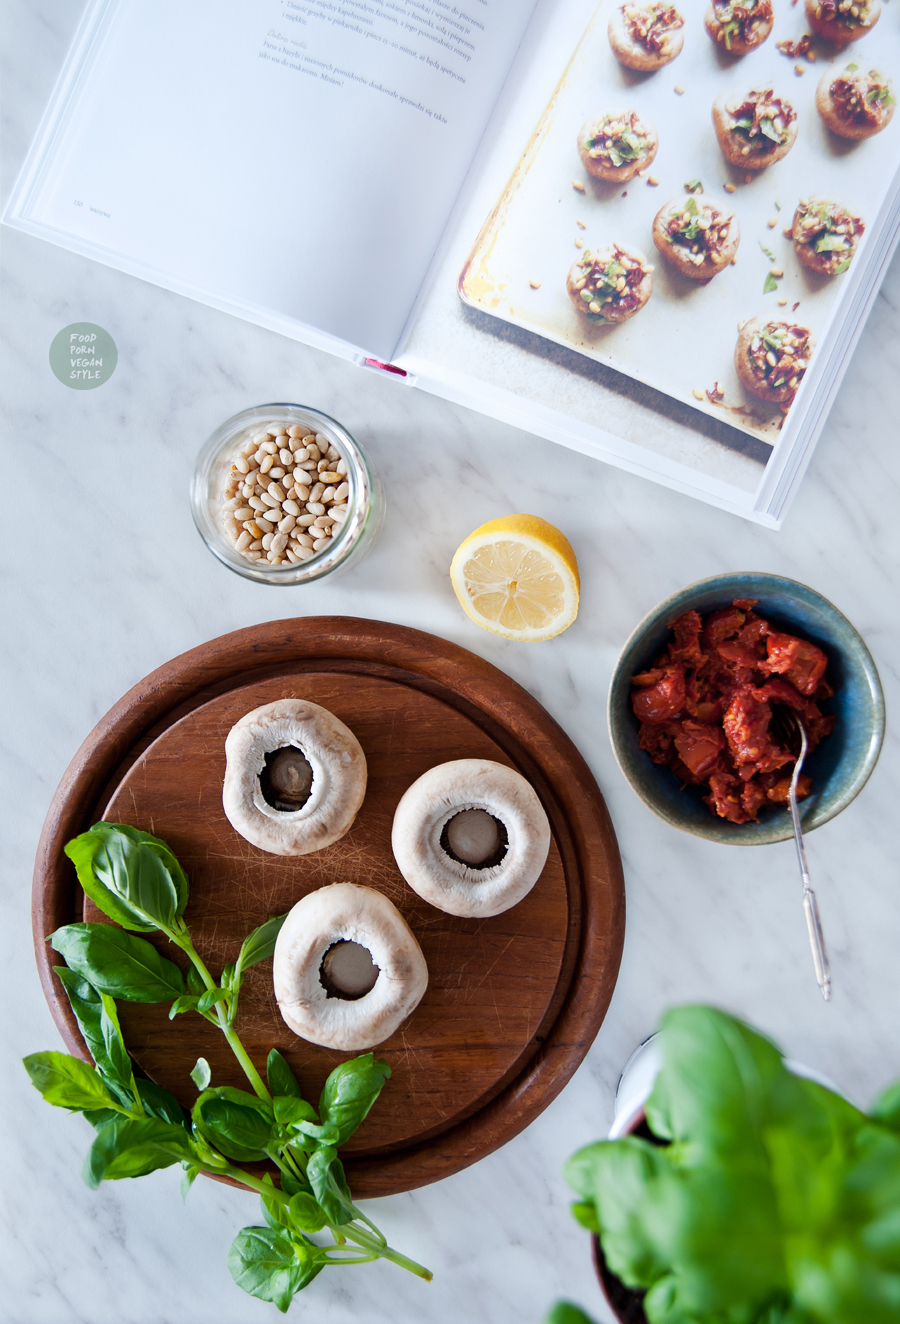 Baked stuffed mushrooms with sun-dried tomatoes, basil and pine nuts